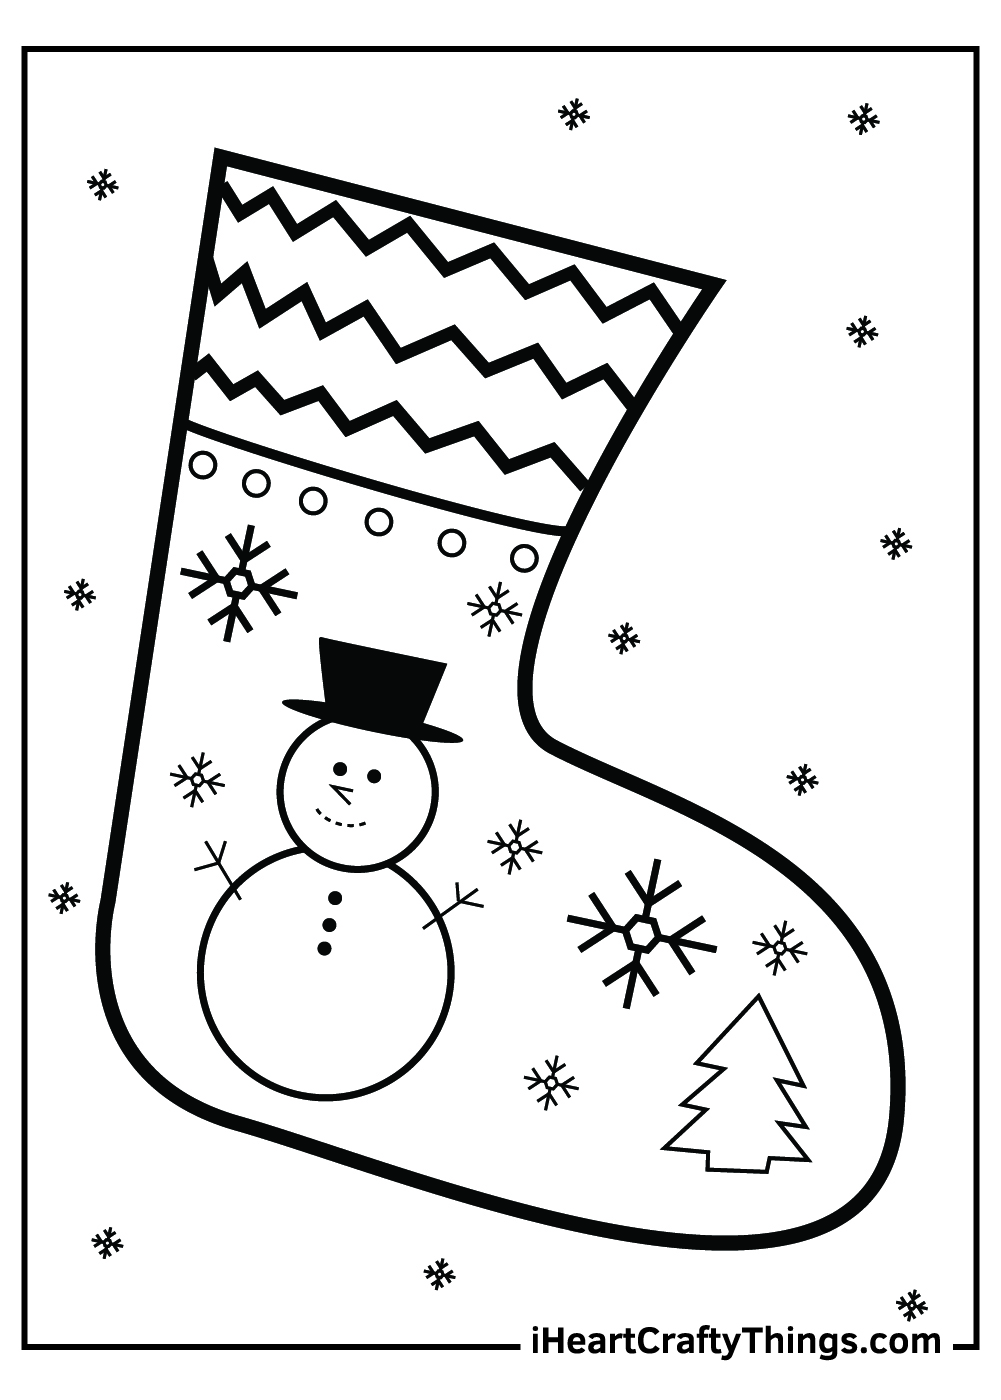 Printable Christmas Stocking Coloring Pages Updated 20